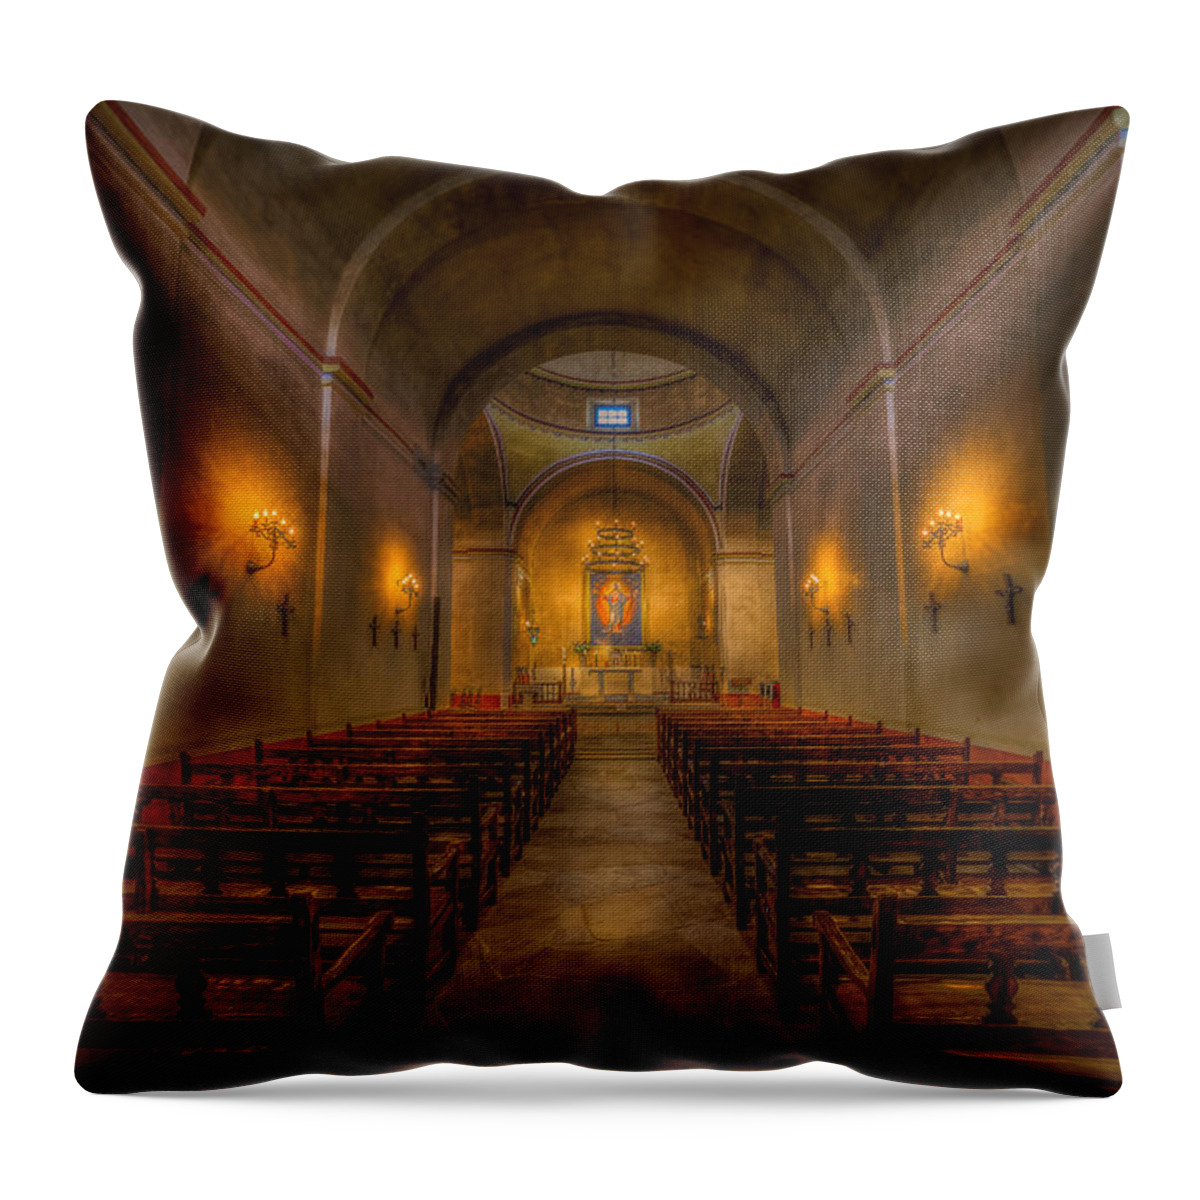 Mission Concepcion Throw Pillow featuring the photograph Mission Concepcion by David Morefield